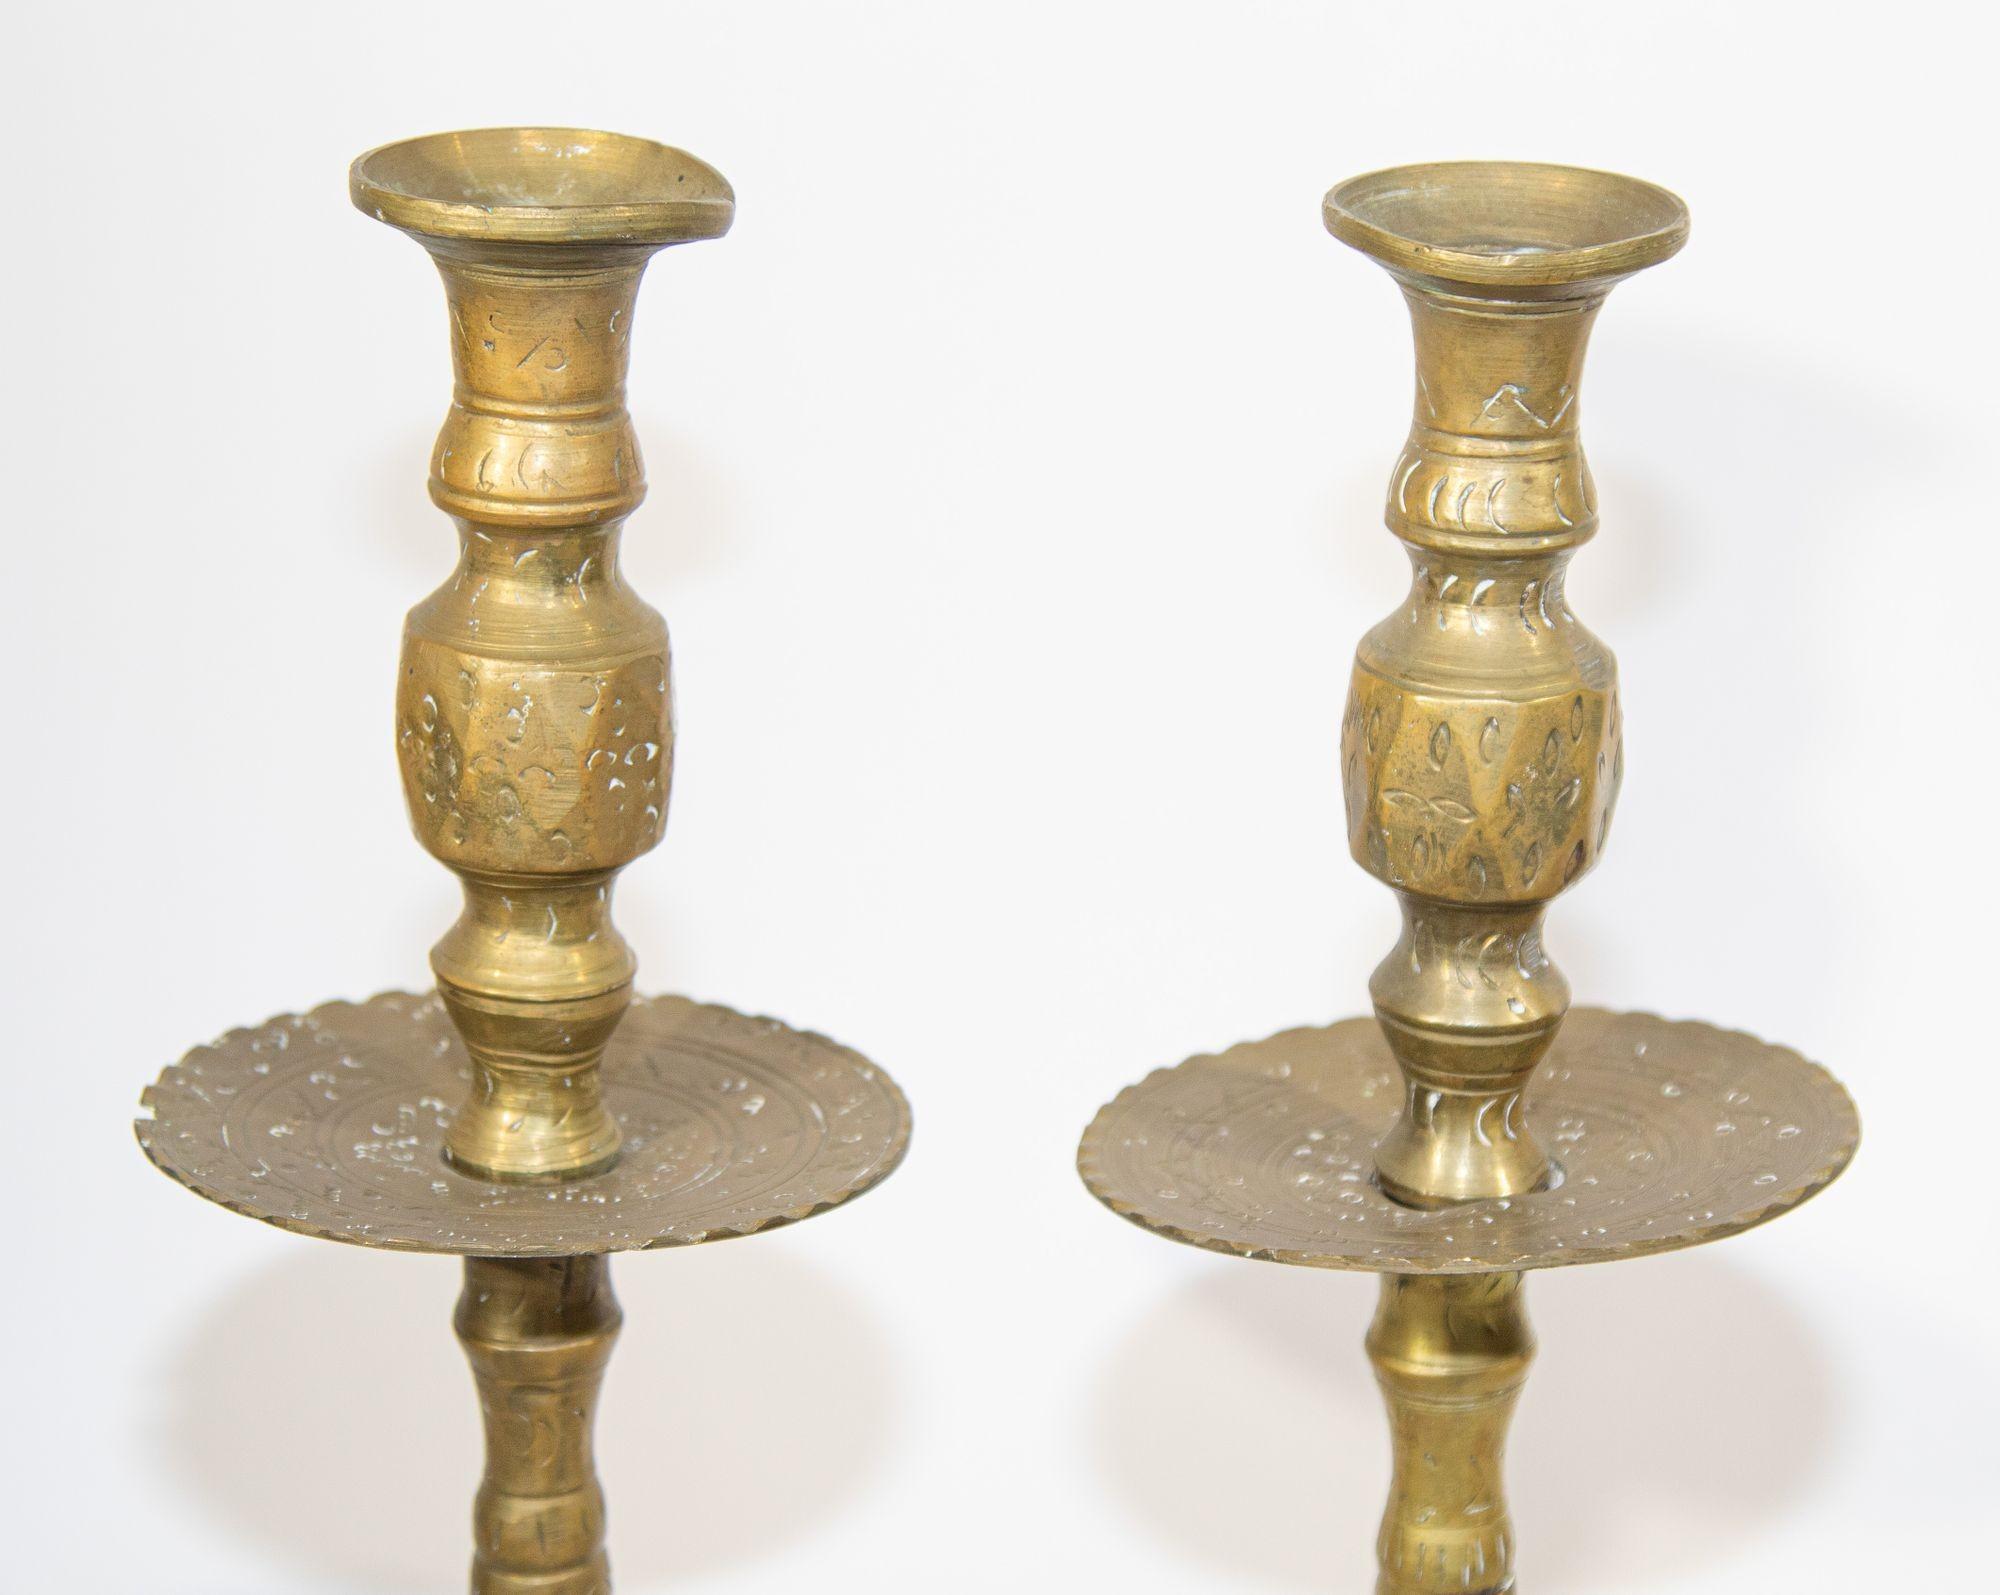 Solid brass large vintage Moroccan candle holders set of two.
Moroccan vintage brass candlestick heavy solid cast brass, handcrafted with etched geometric design.
Tall Moorish style Mid Century brass candlesticks.
These would be perfect to dress